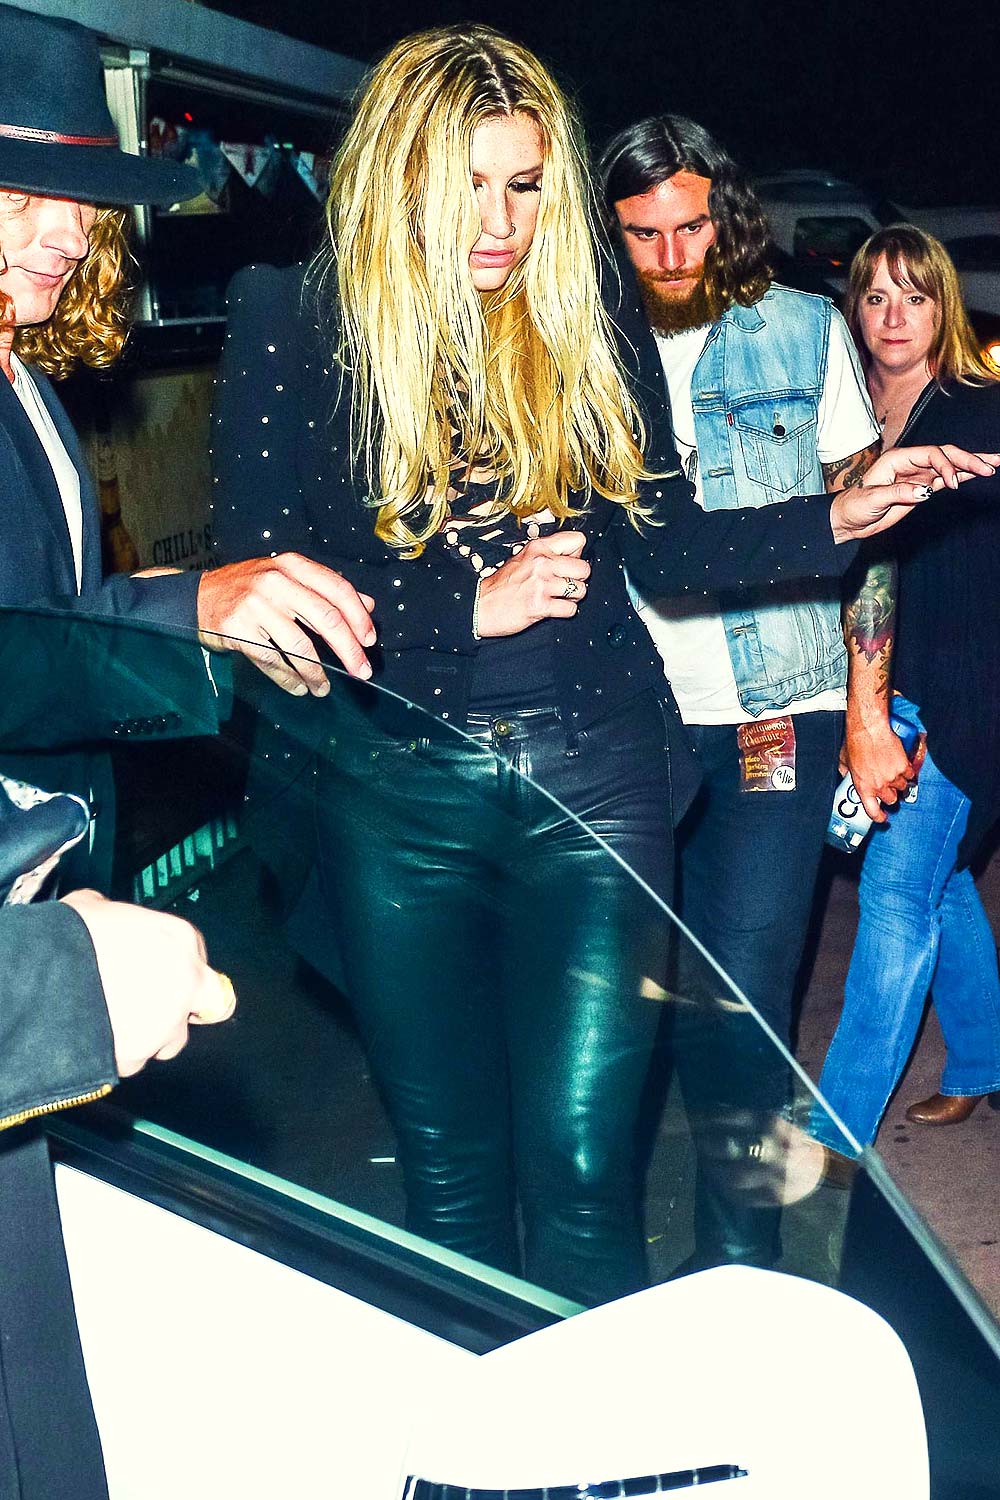 Kesha leaving The Roxy in Hollywood - Leather Celebrities